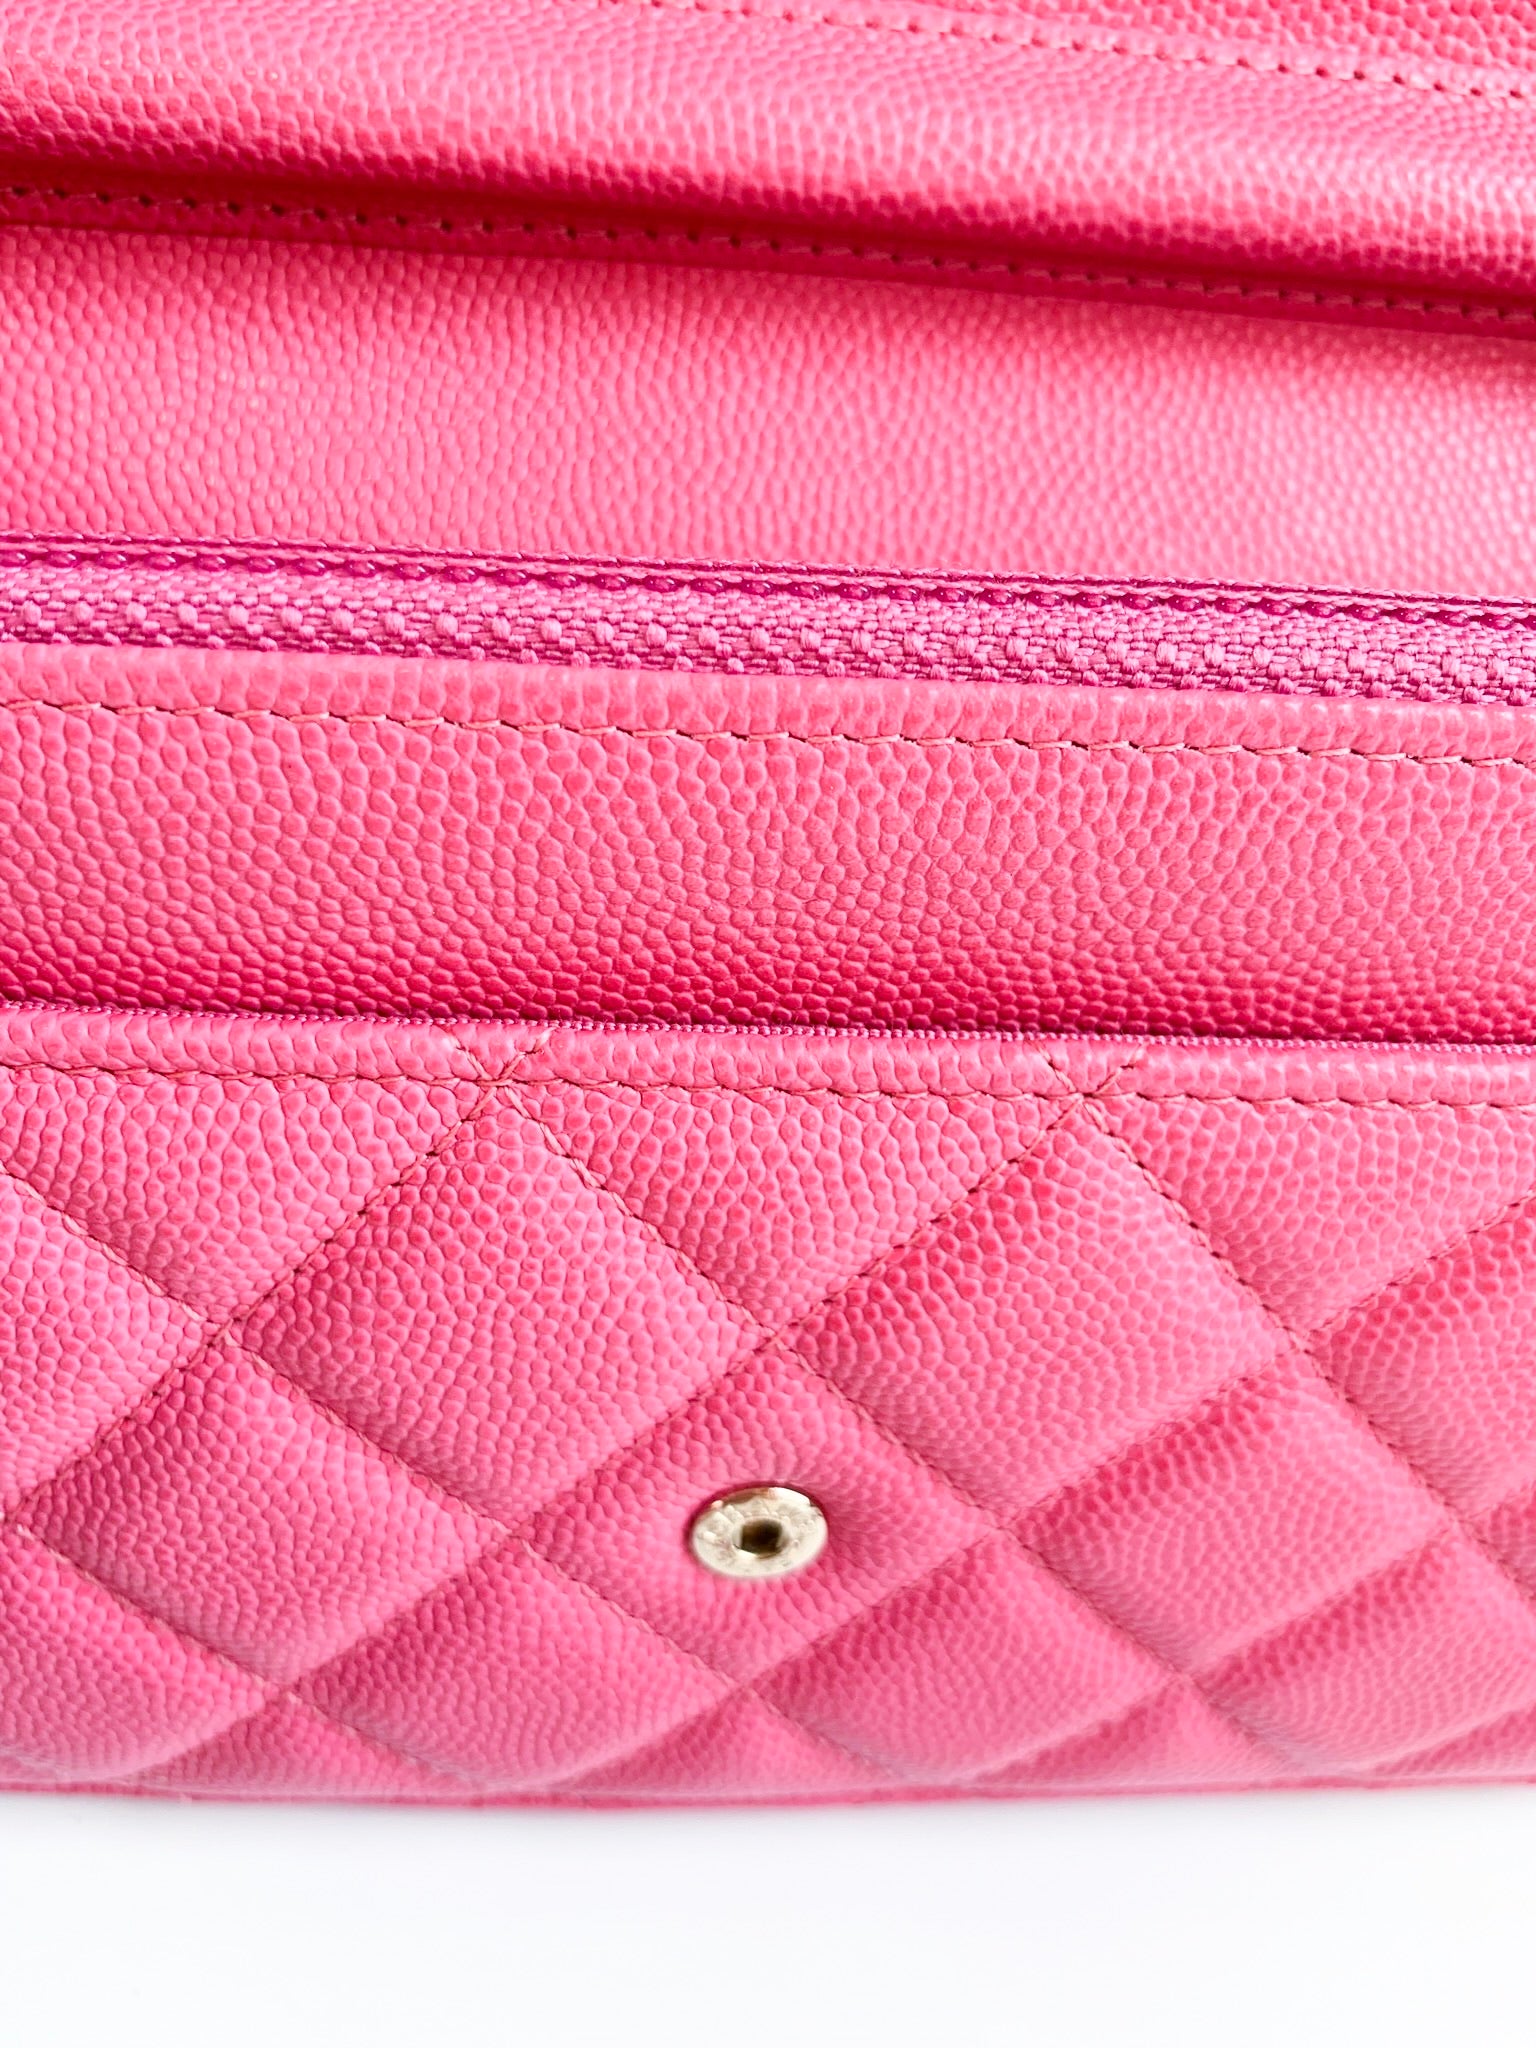 chanel wallet on chain pink caviar